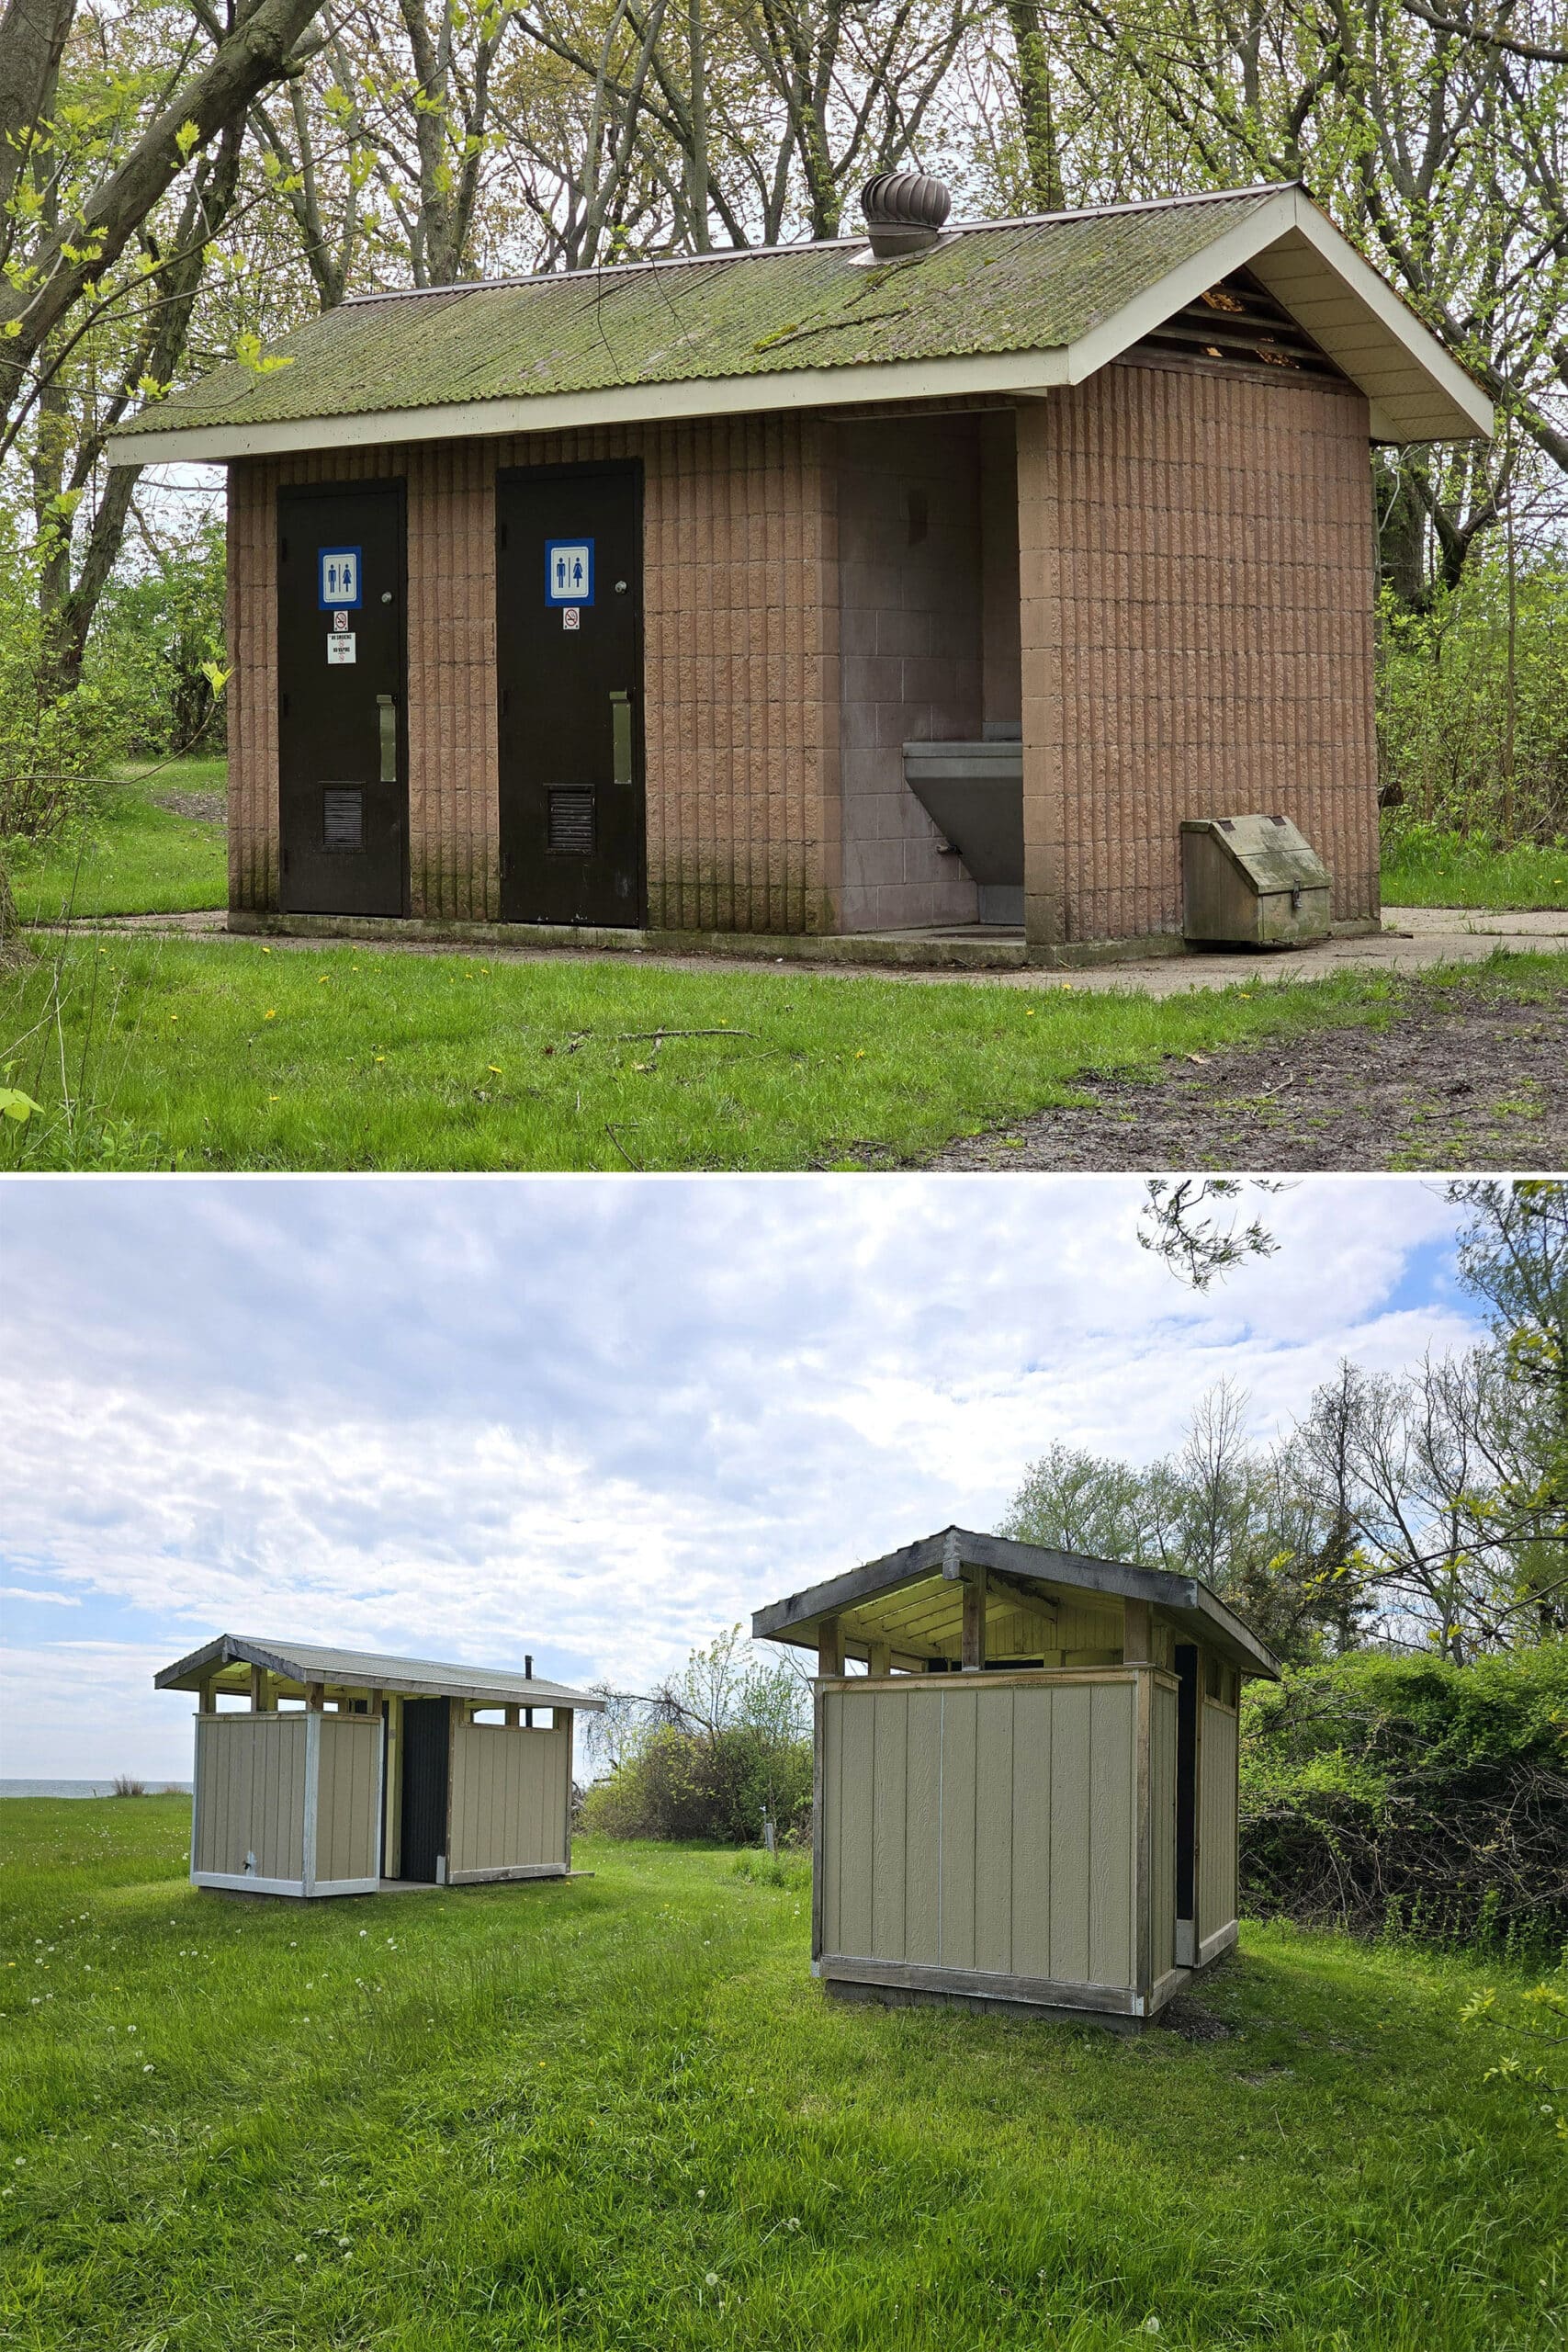 2 part image showing some of the toilet facilities at Rock Point.